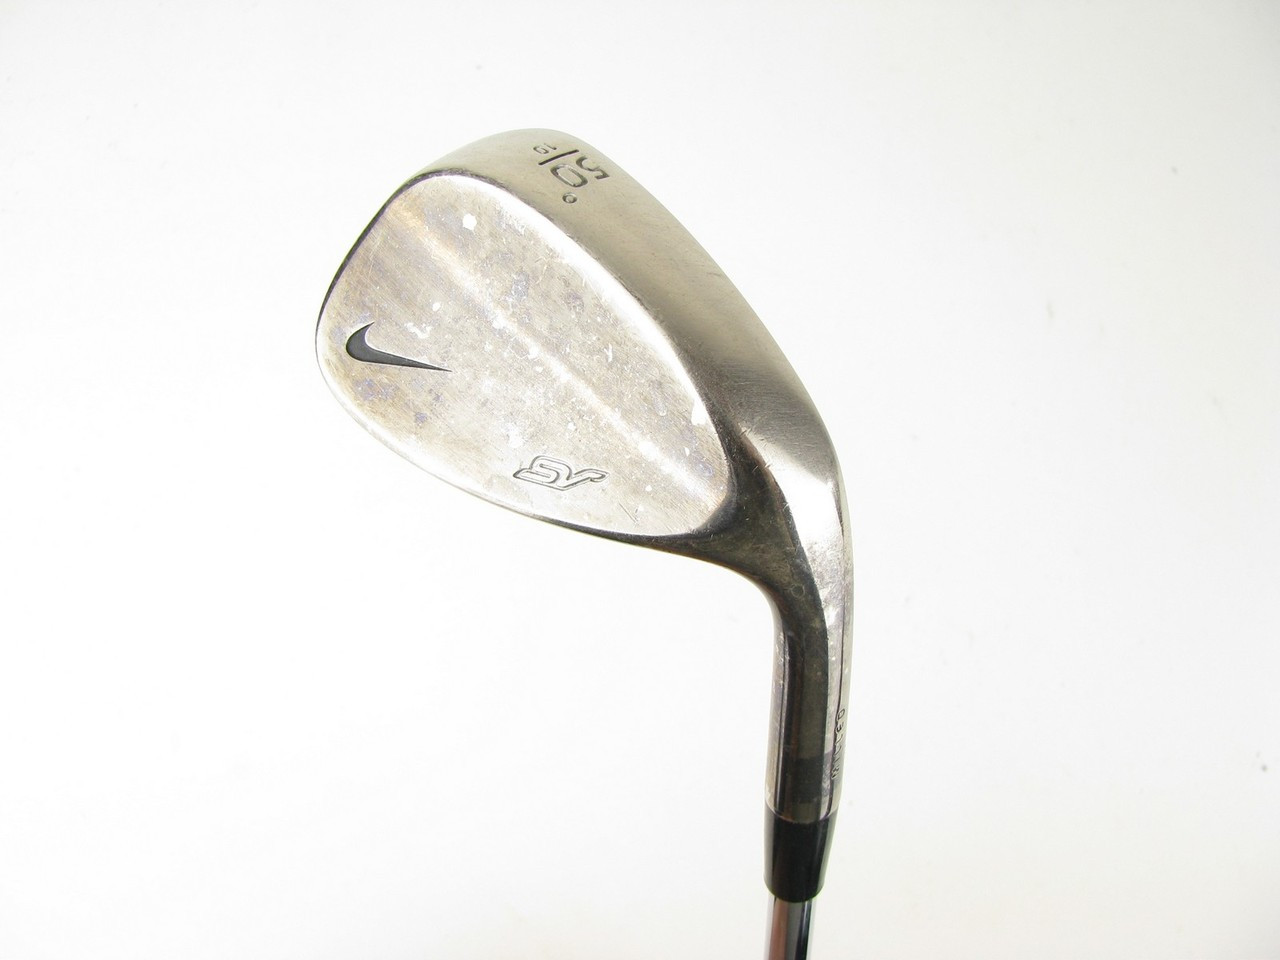 Nike SV Gap 50-10 w/ Steel S400 (Out of Stock) - Clubs Covers Golf